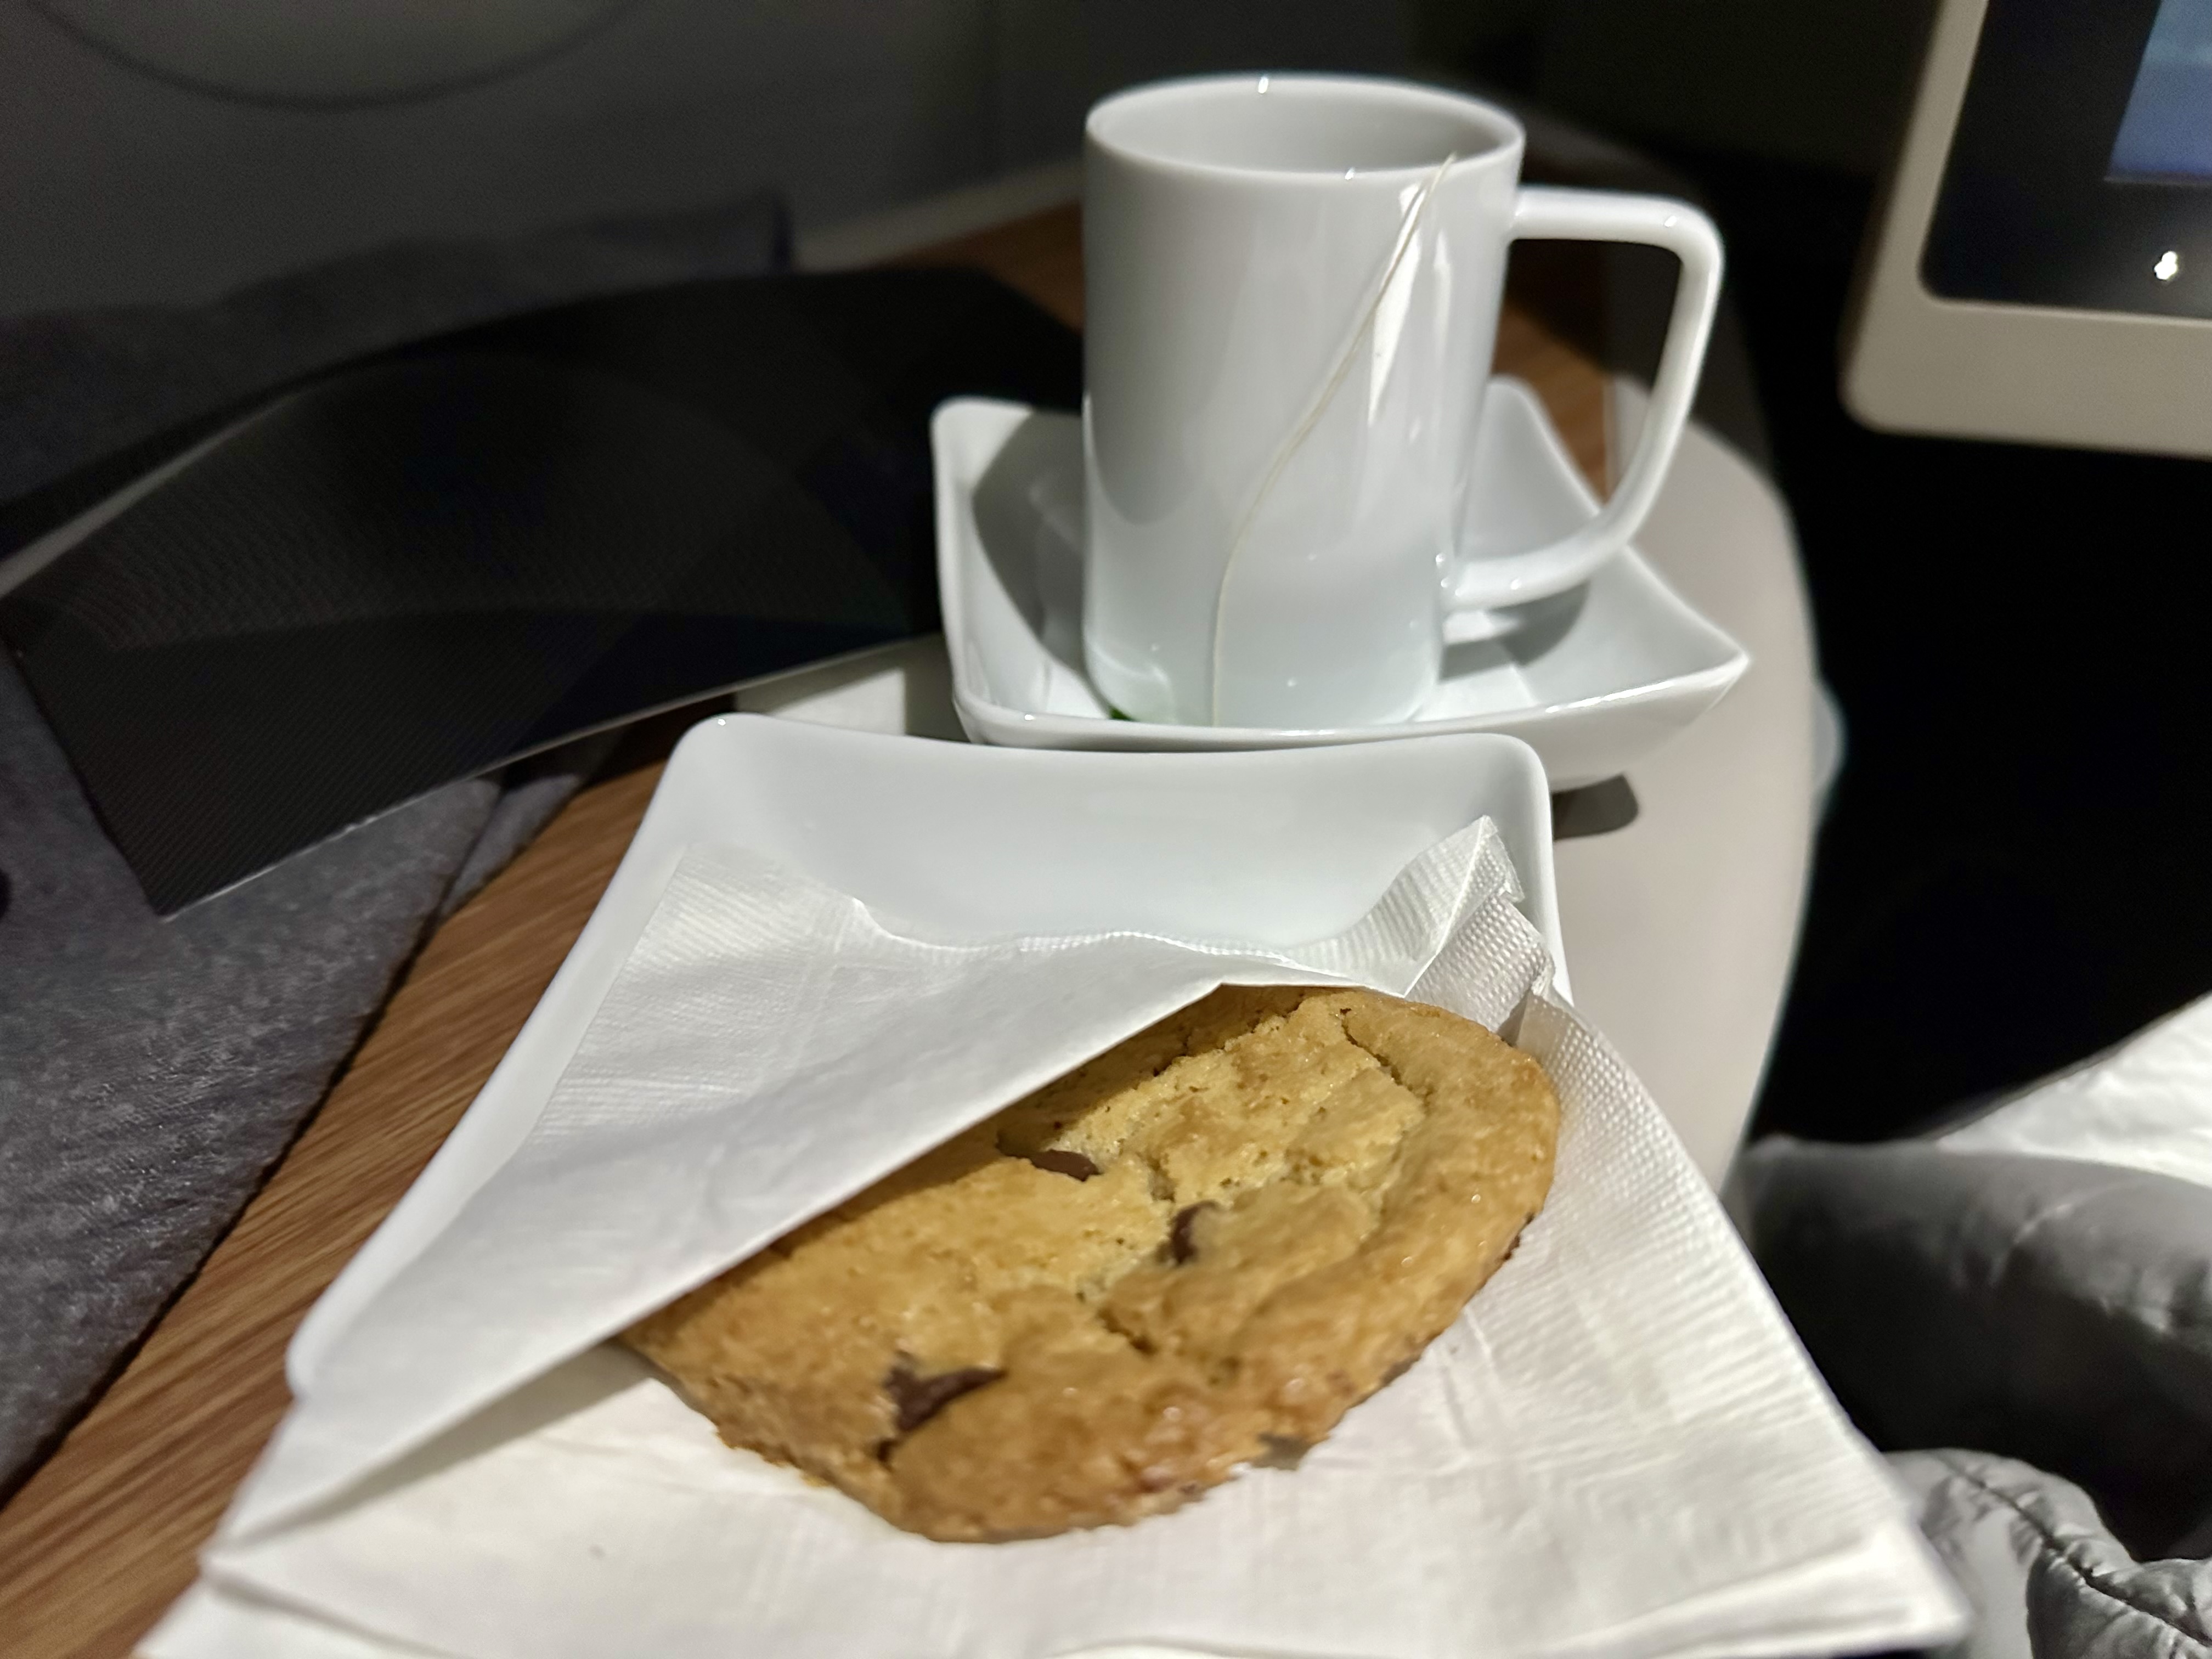 a cookie and a cup on a plate